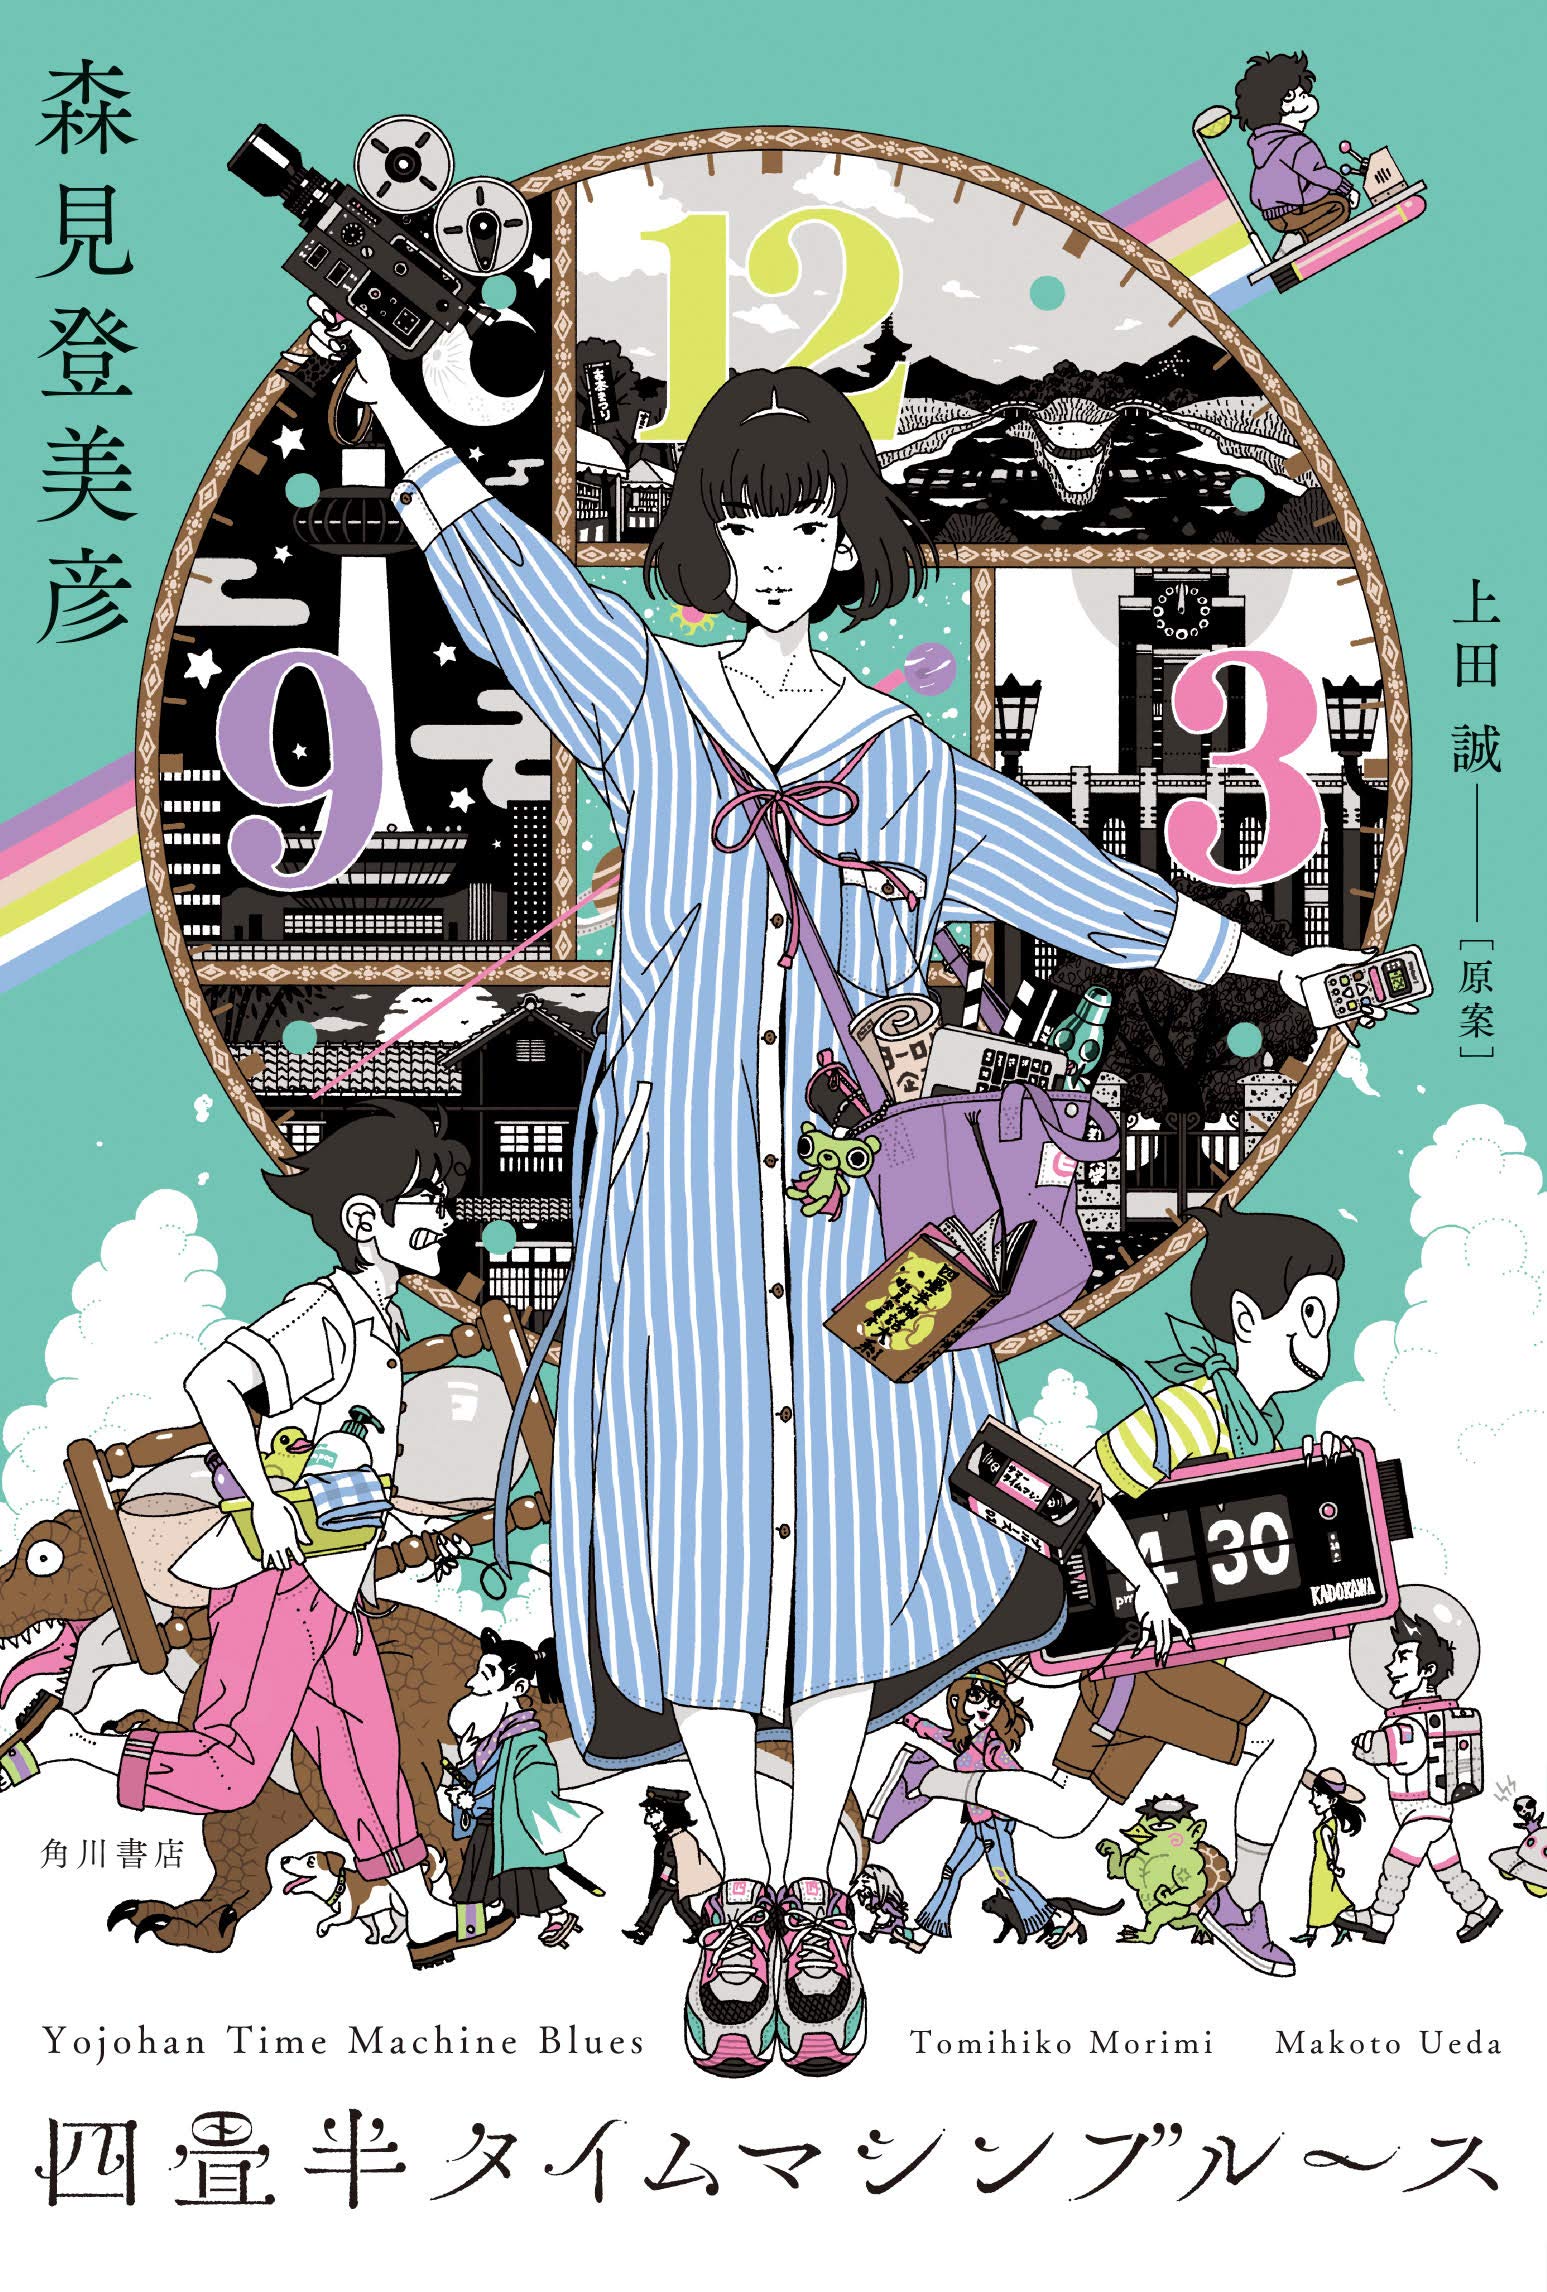 The cover of Yojohan Time Machine Blues, written by Tomiko Morimi and Makoto Ueda and illustrated by Yusuke Nakamura, featuring the main characters running amok in various time travel related ways. 